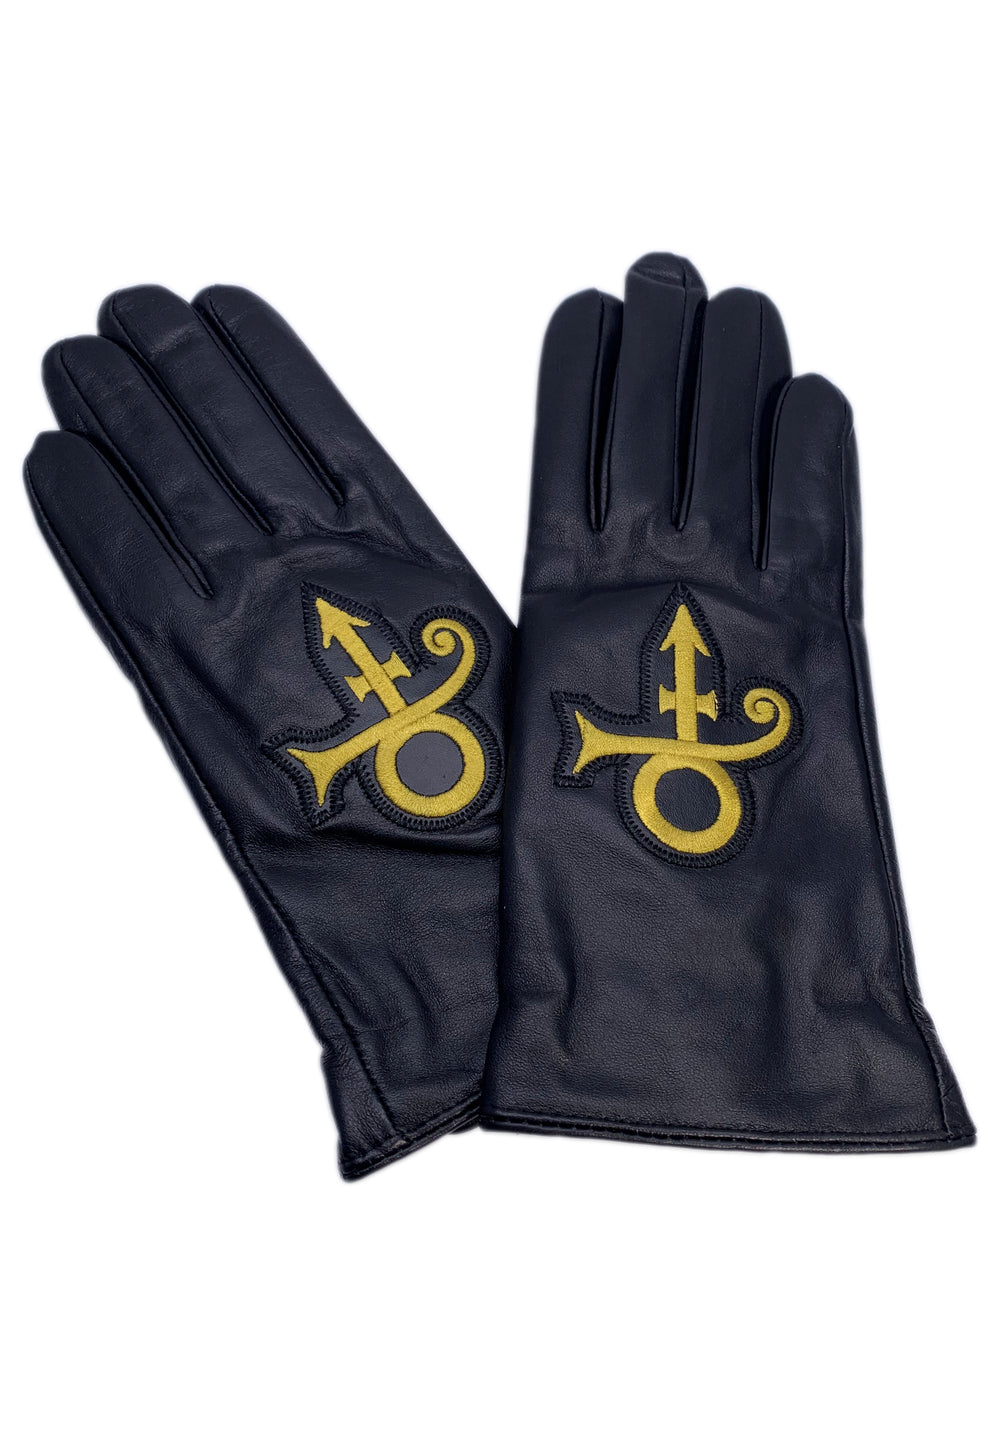 Official Paisley Park Leather Gloves Brand New Various Sizes Love